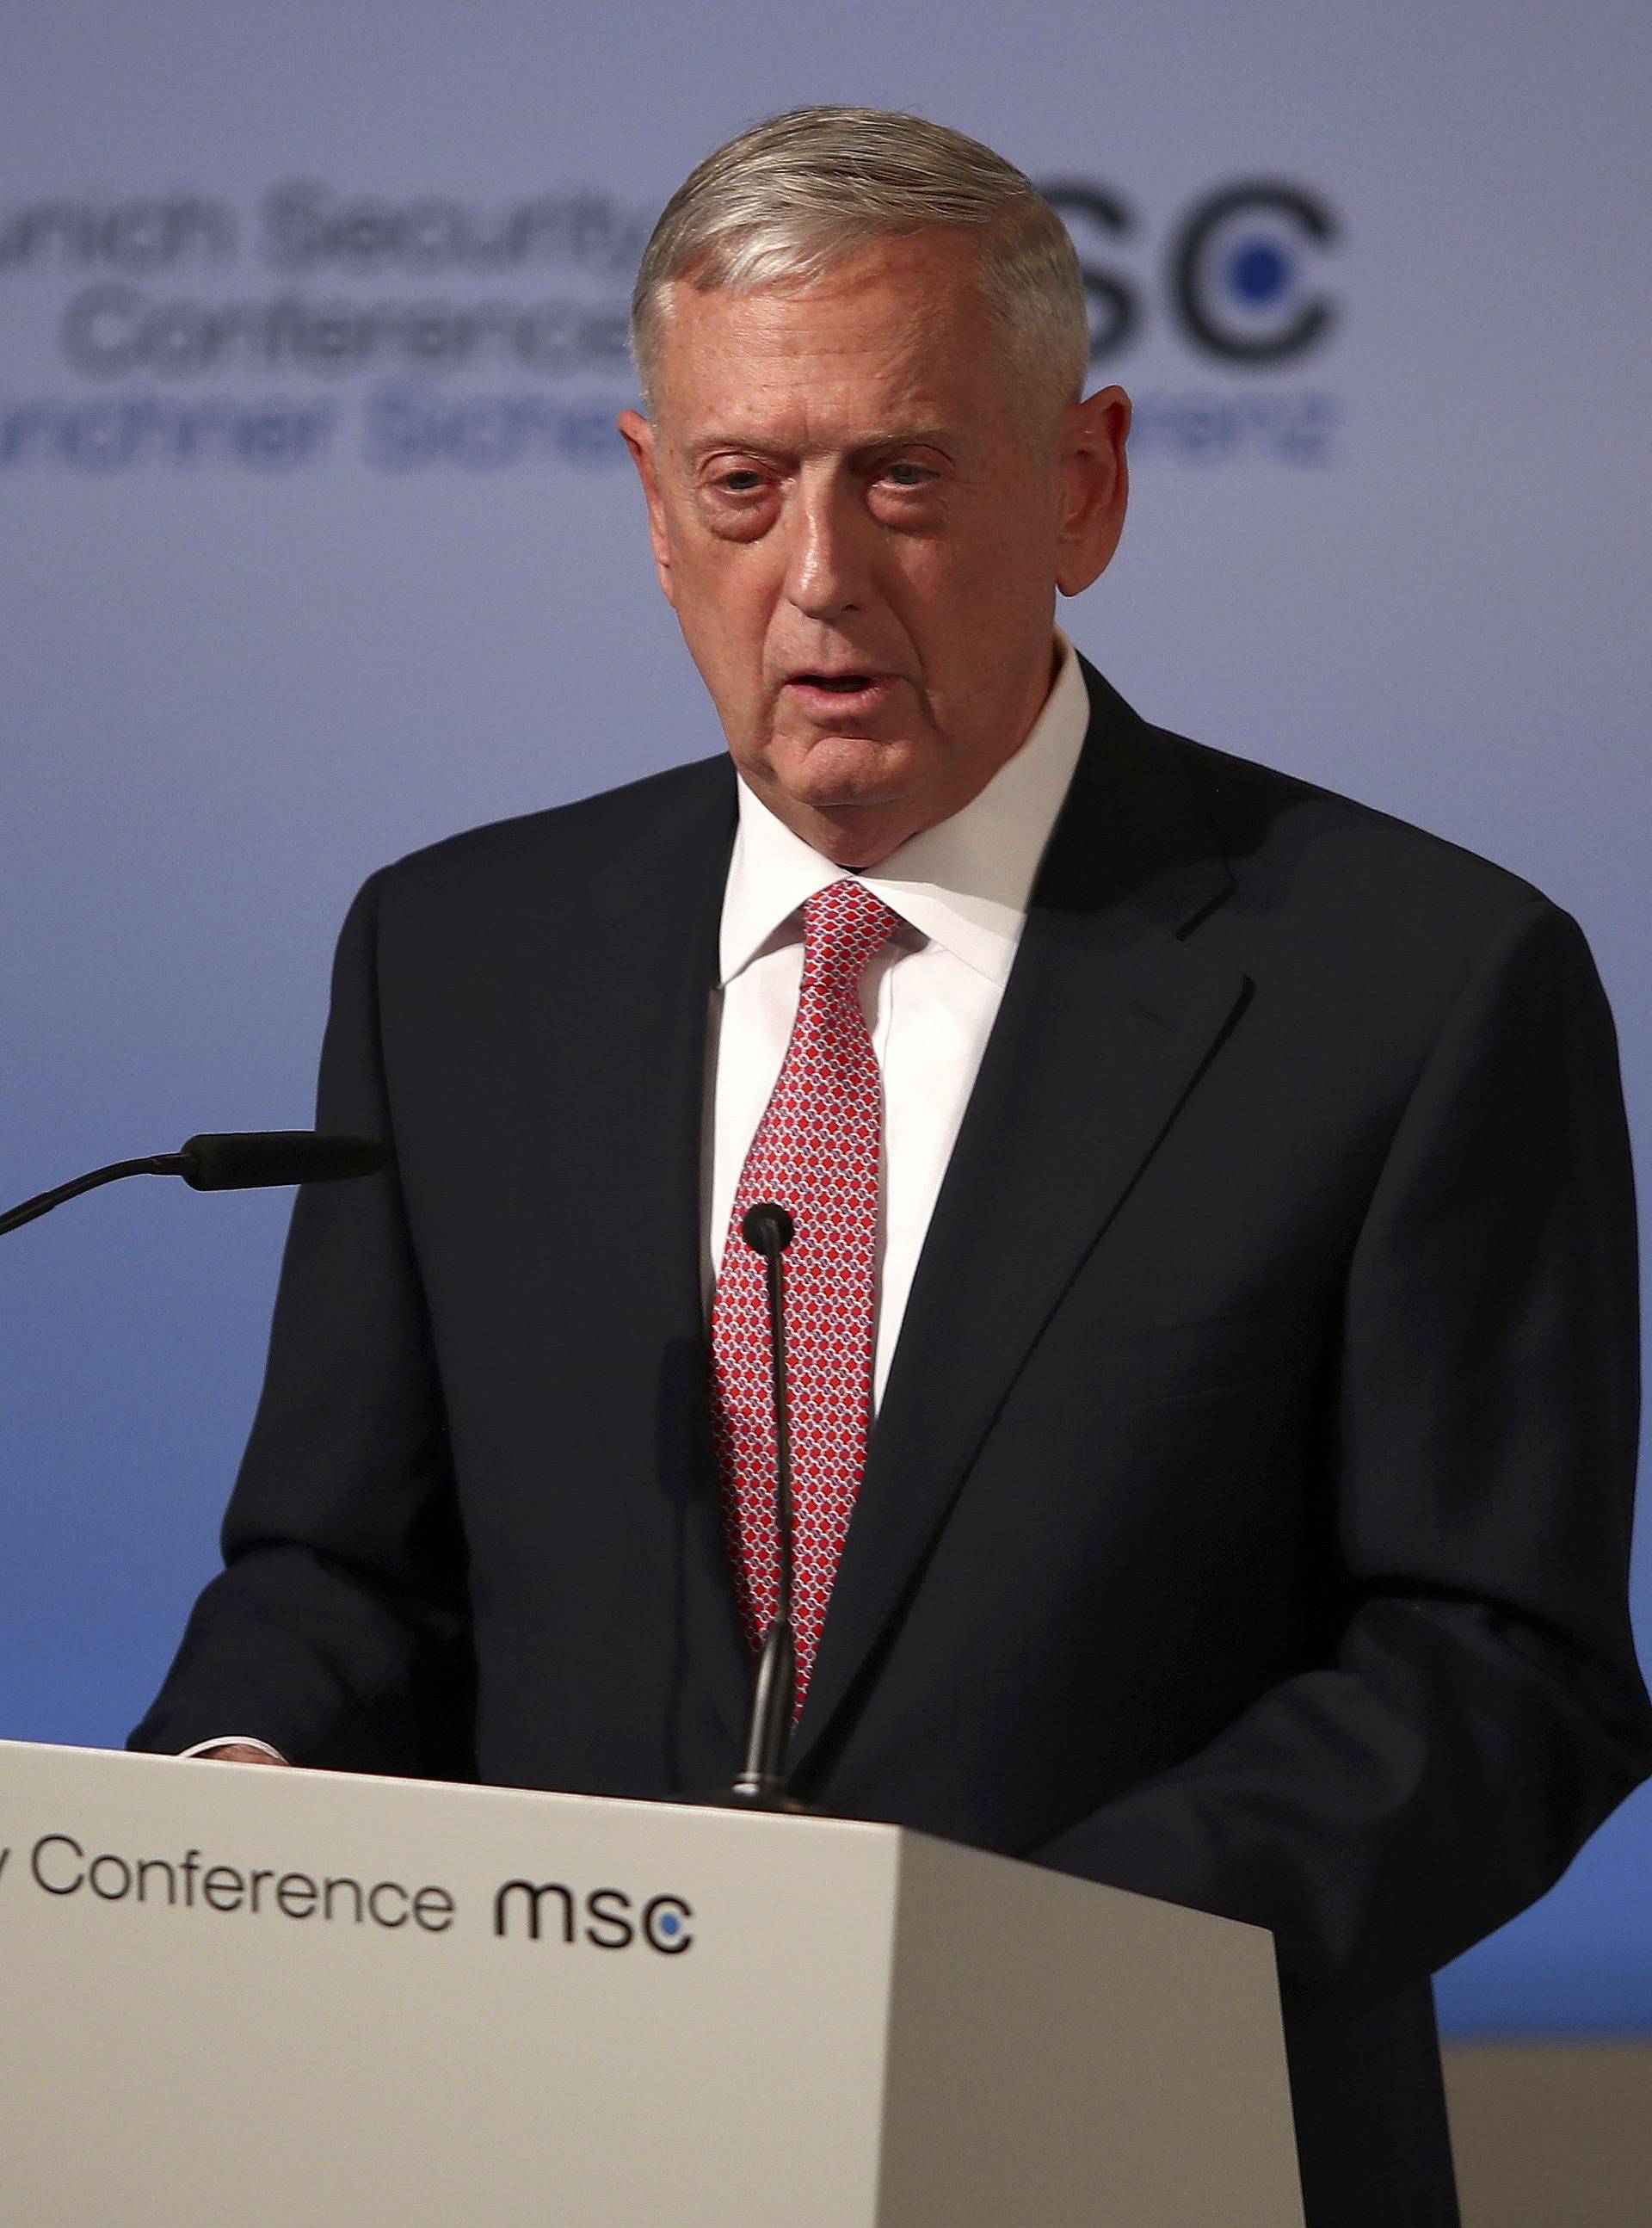 U.S. Defense Secretary Mattis speaks at the opening of the 53rd Munich Security Conference in Munich